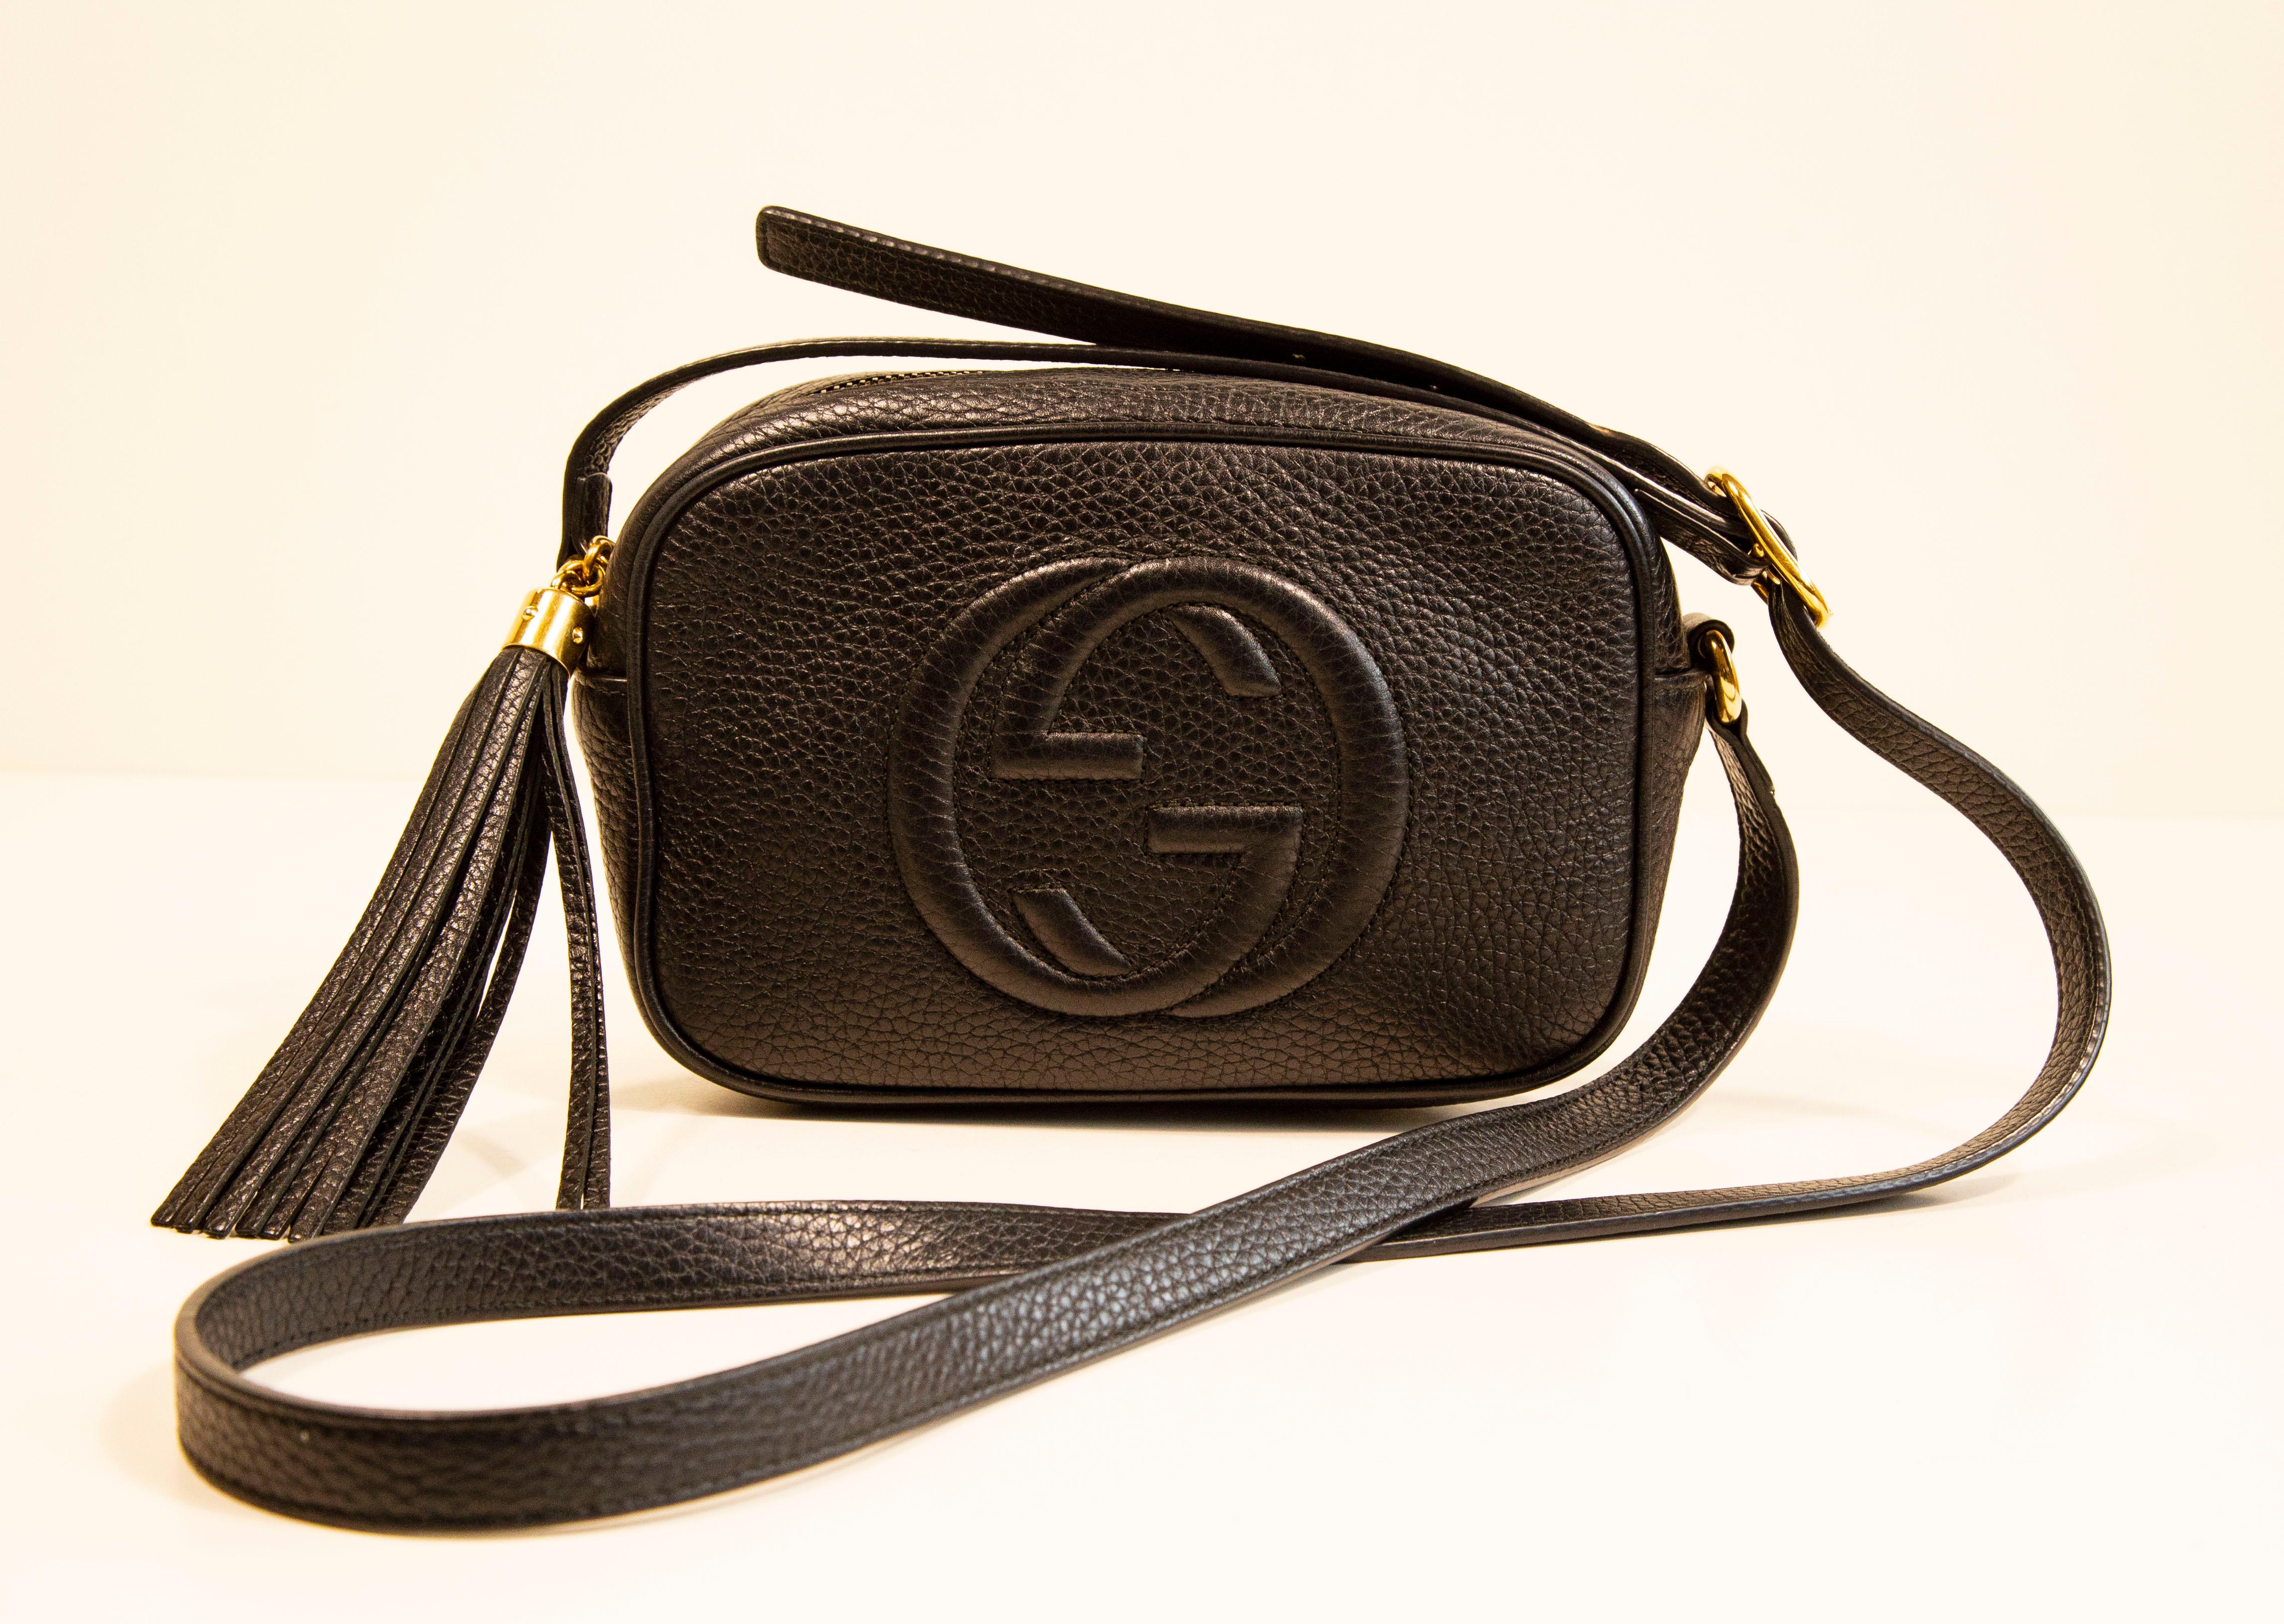 Gucci Mini Soho Crossbody Bag in Black Leather In Excellent Condition For Sale In Arnhem, NL